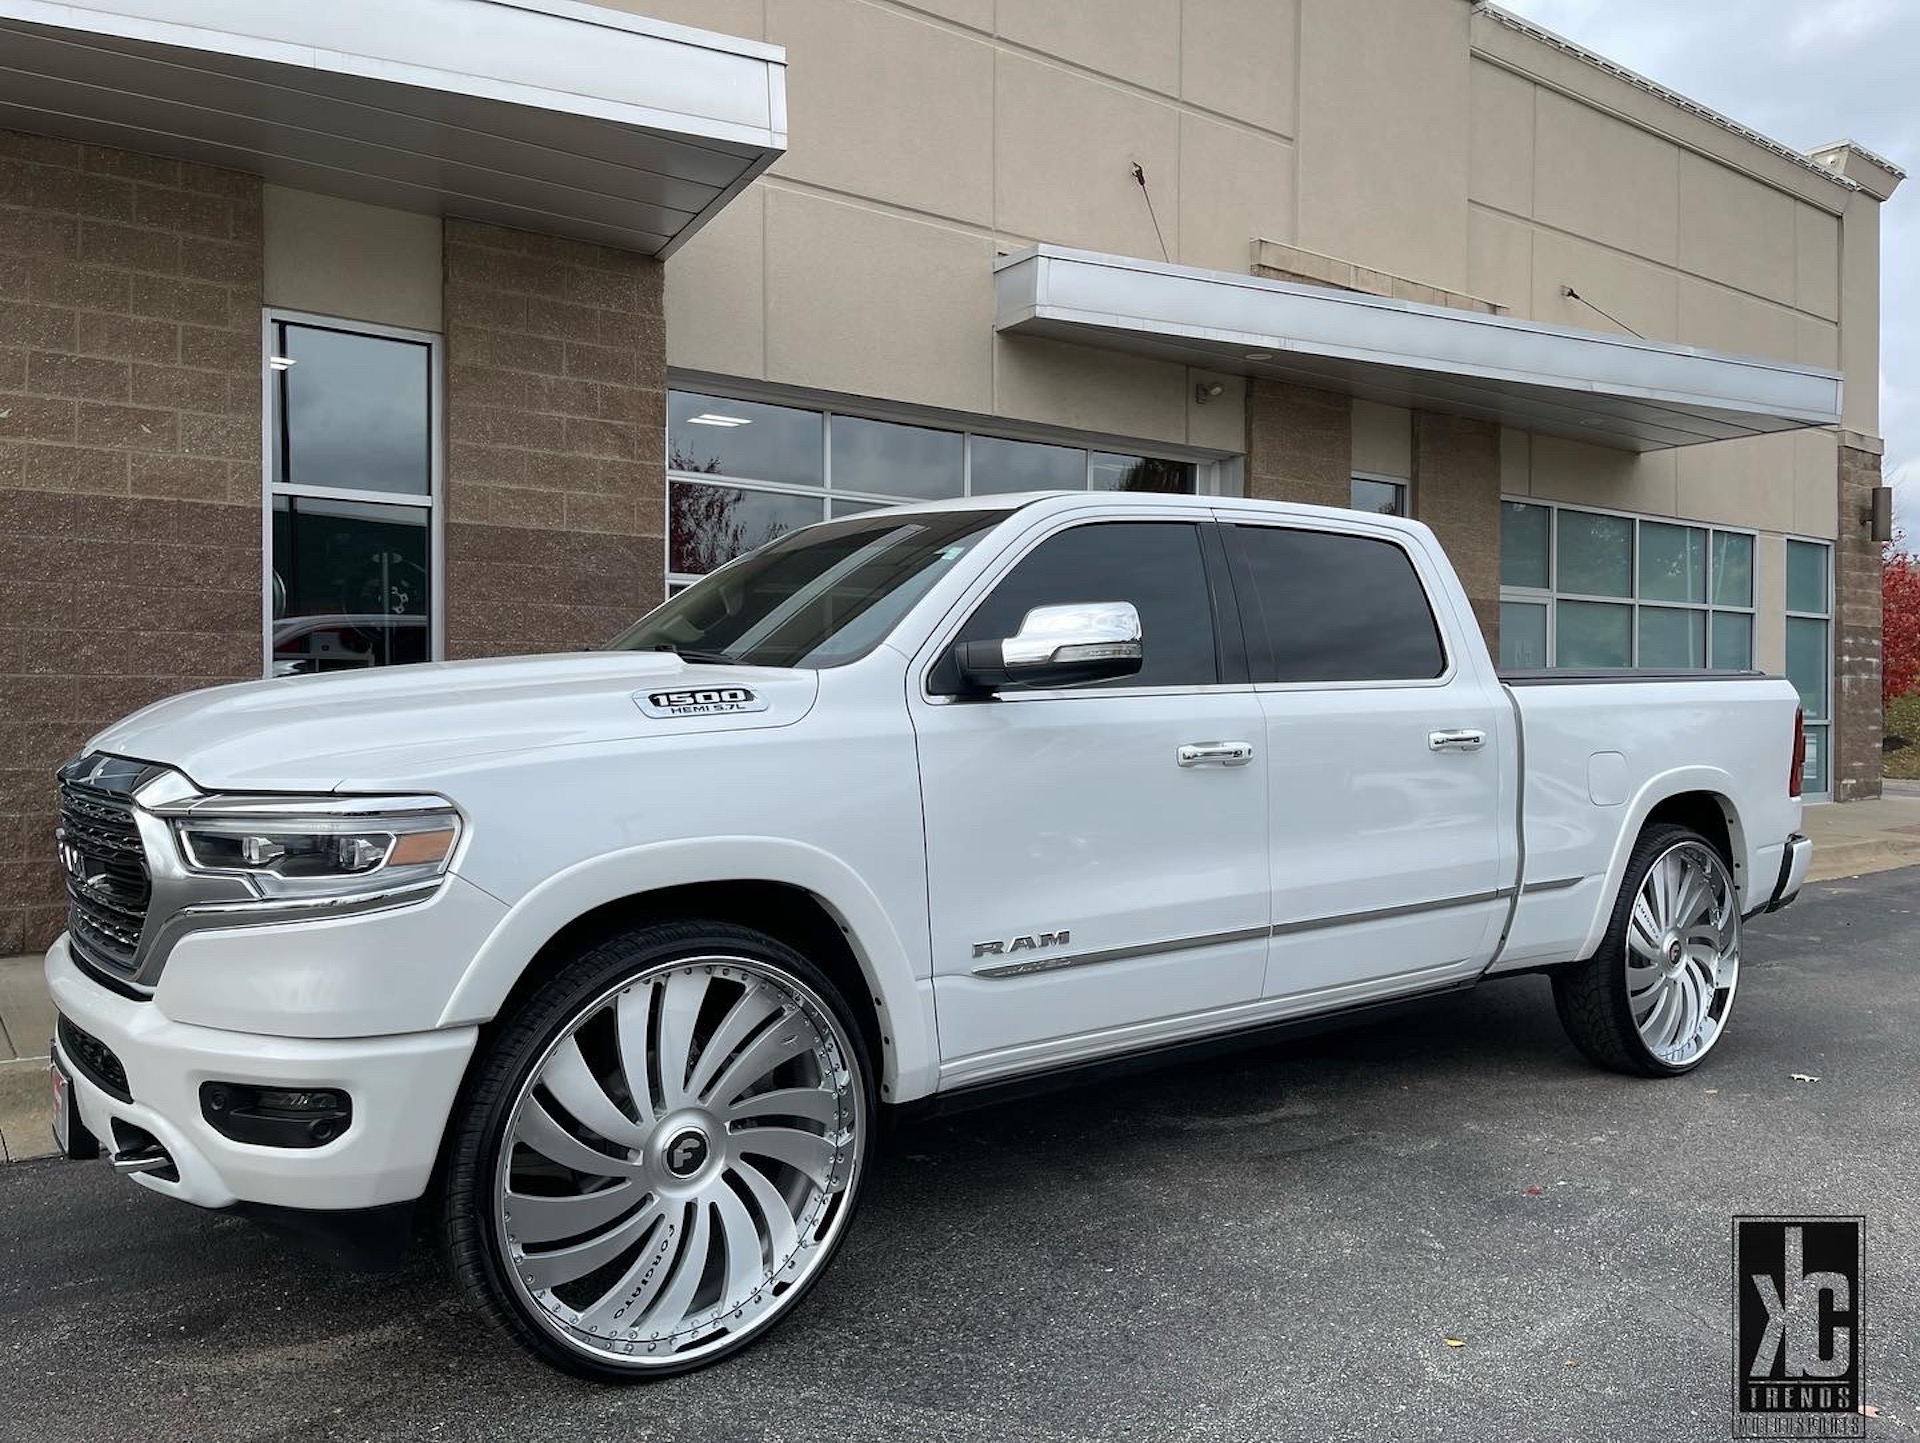  Ram 1500 with 